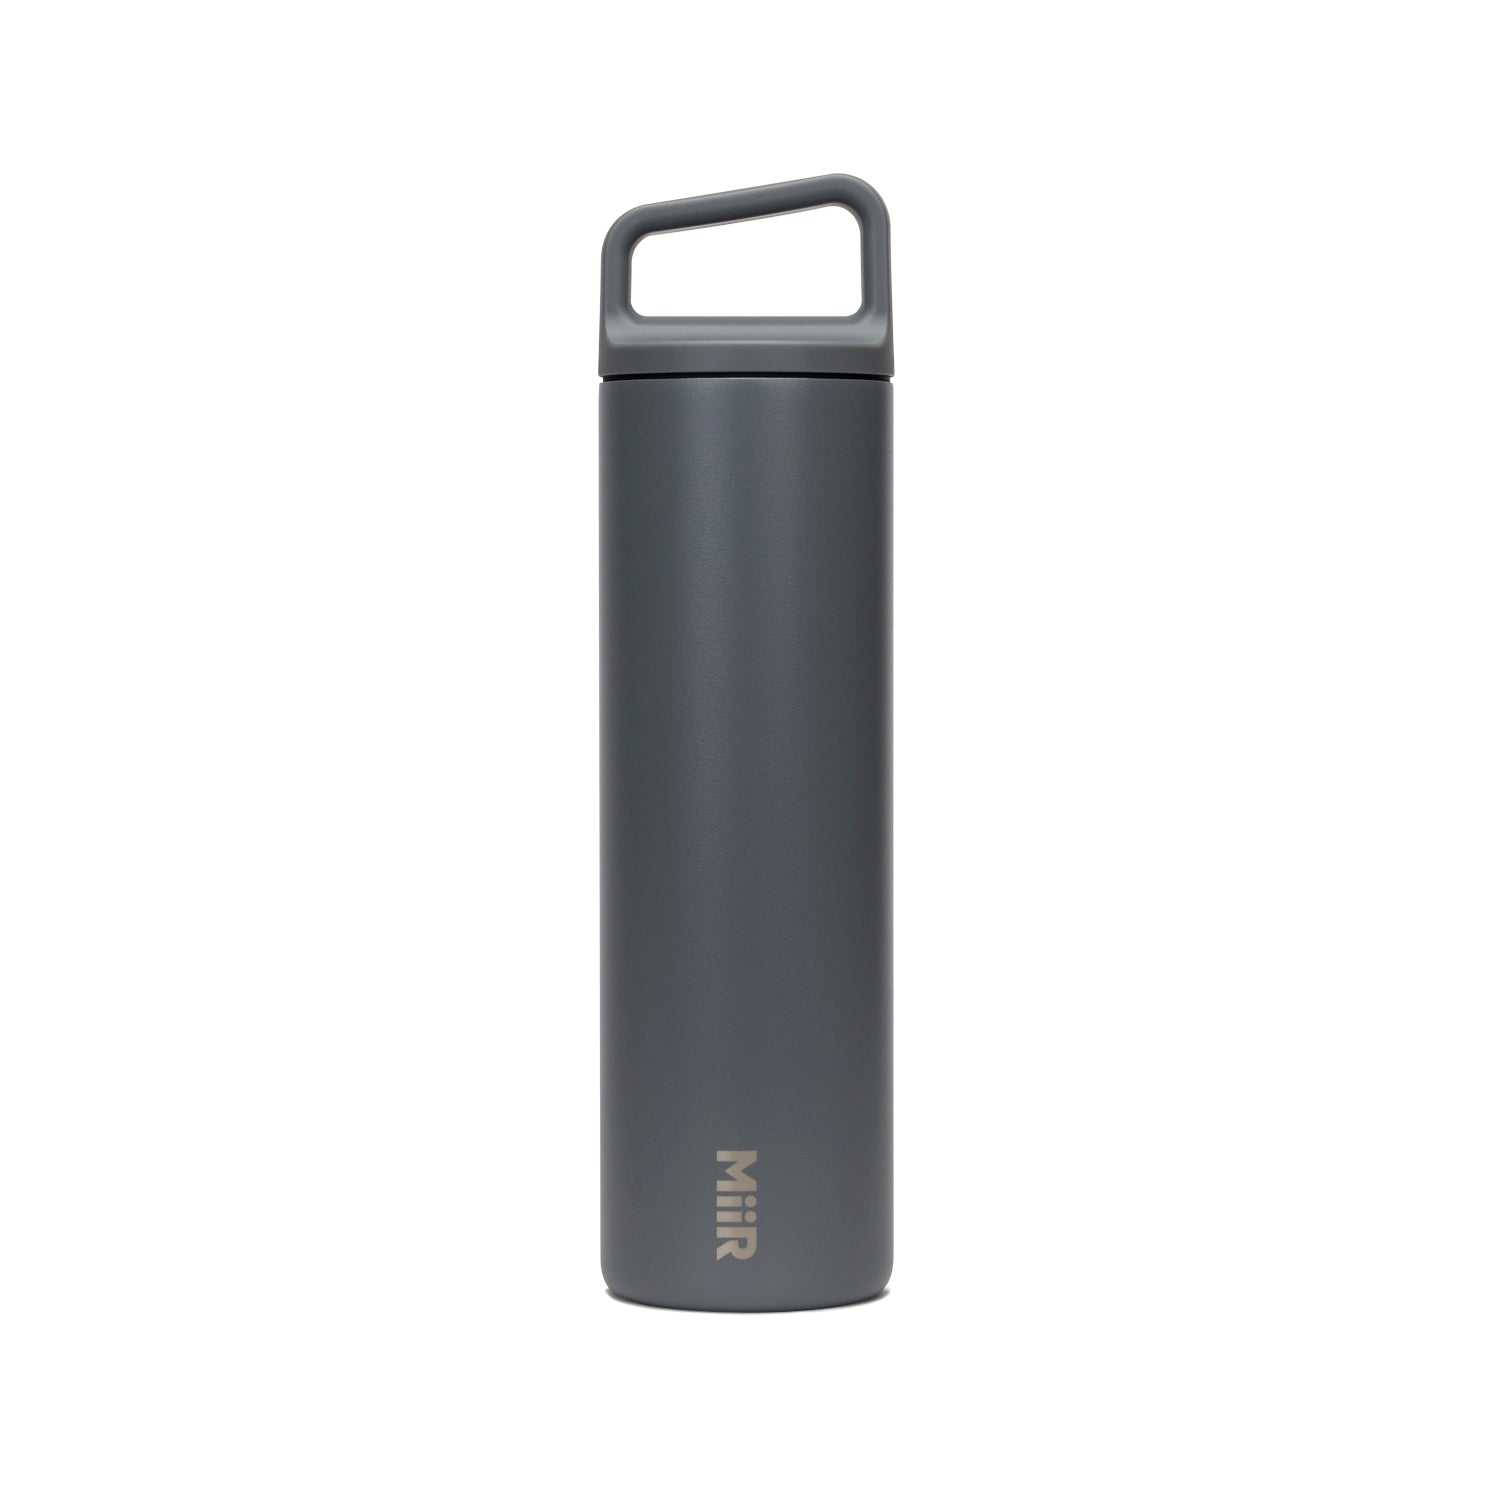 MiiR Wide-Mouth Insulated Bottle–20 oz. | Home